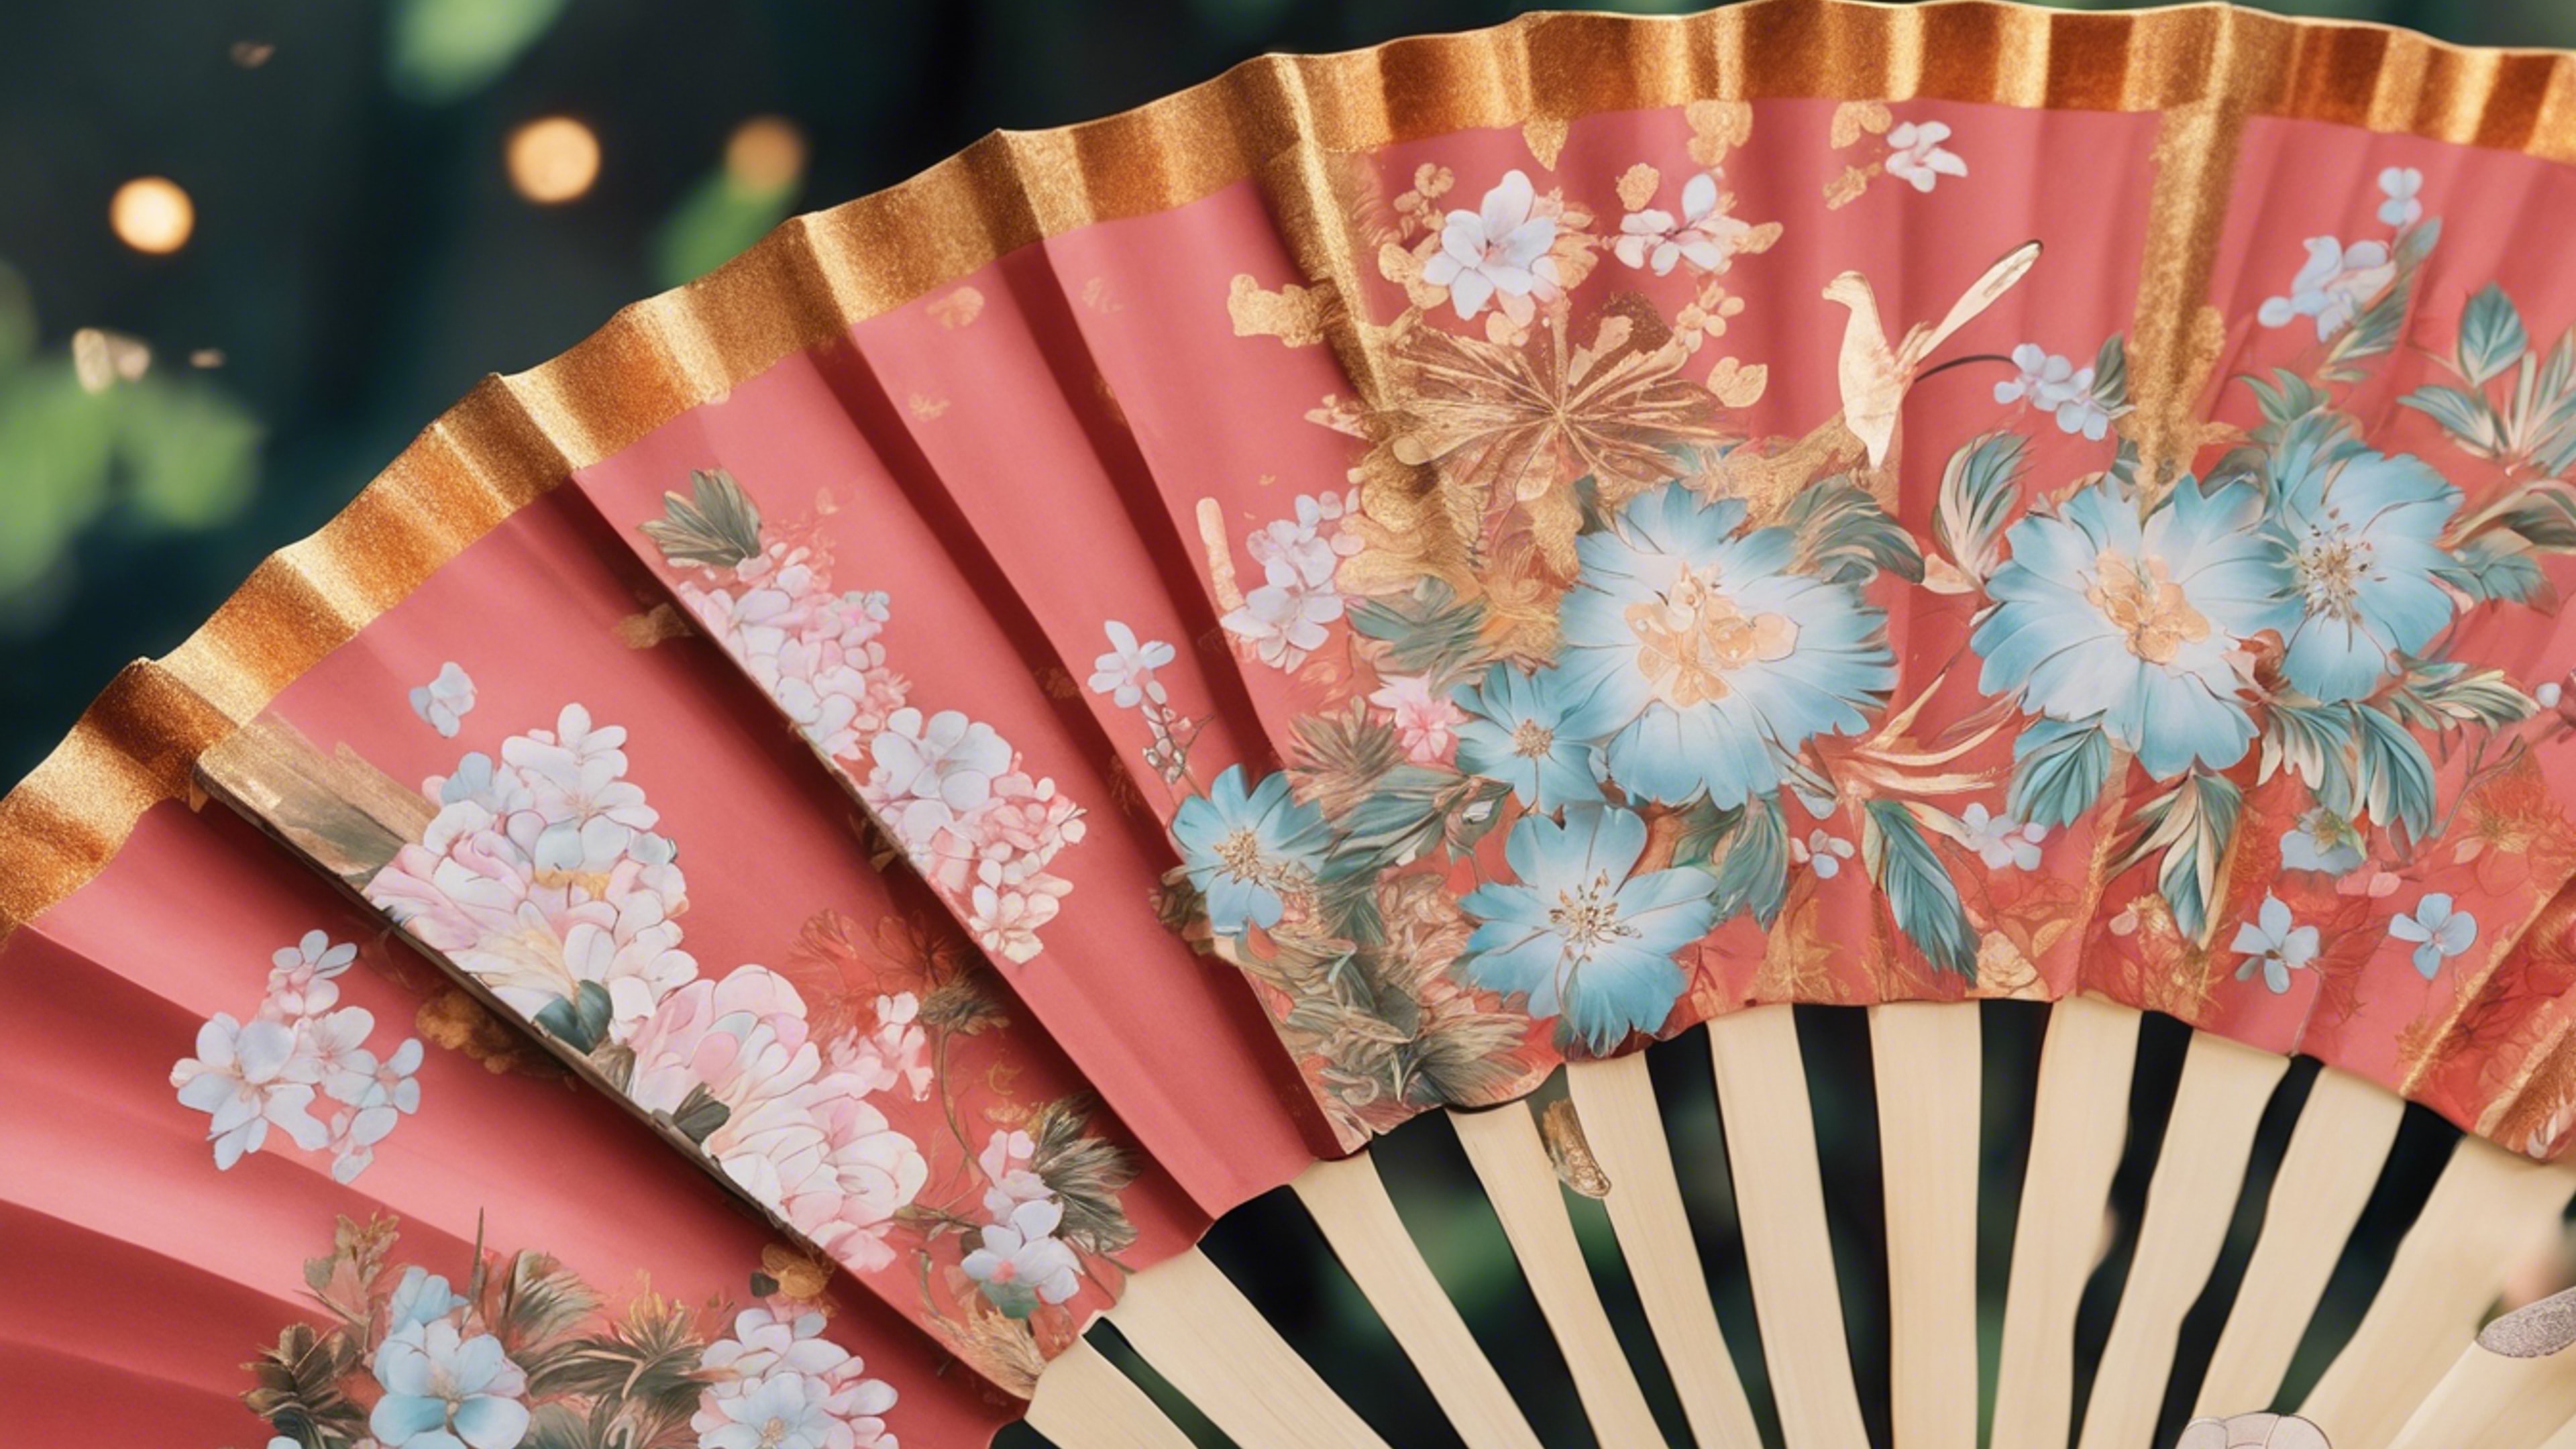 Details of a beautifully hand-painted Japanese folding fan, with floral motifs and gold ink.壁紙[fcd2c81630da47d2a1f0]